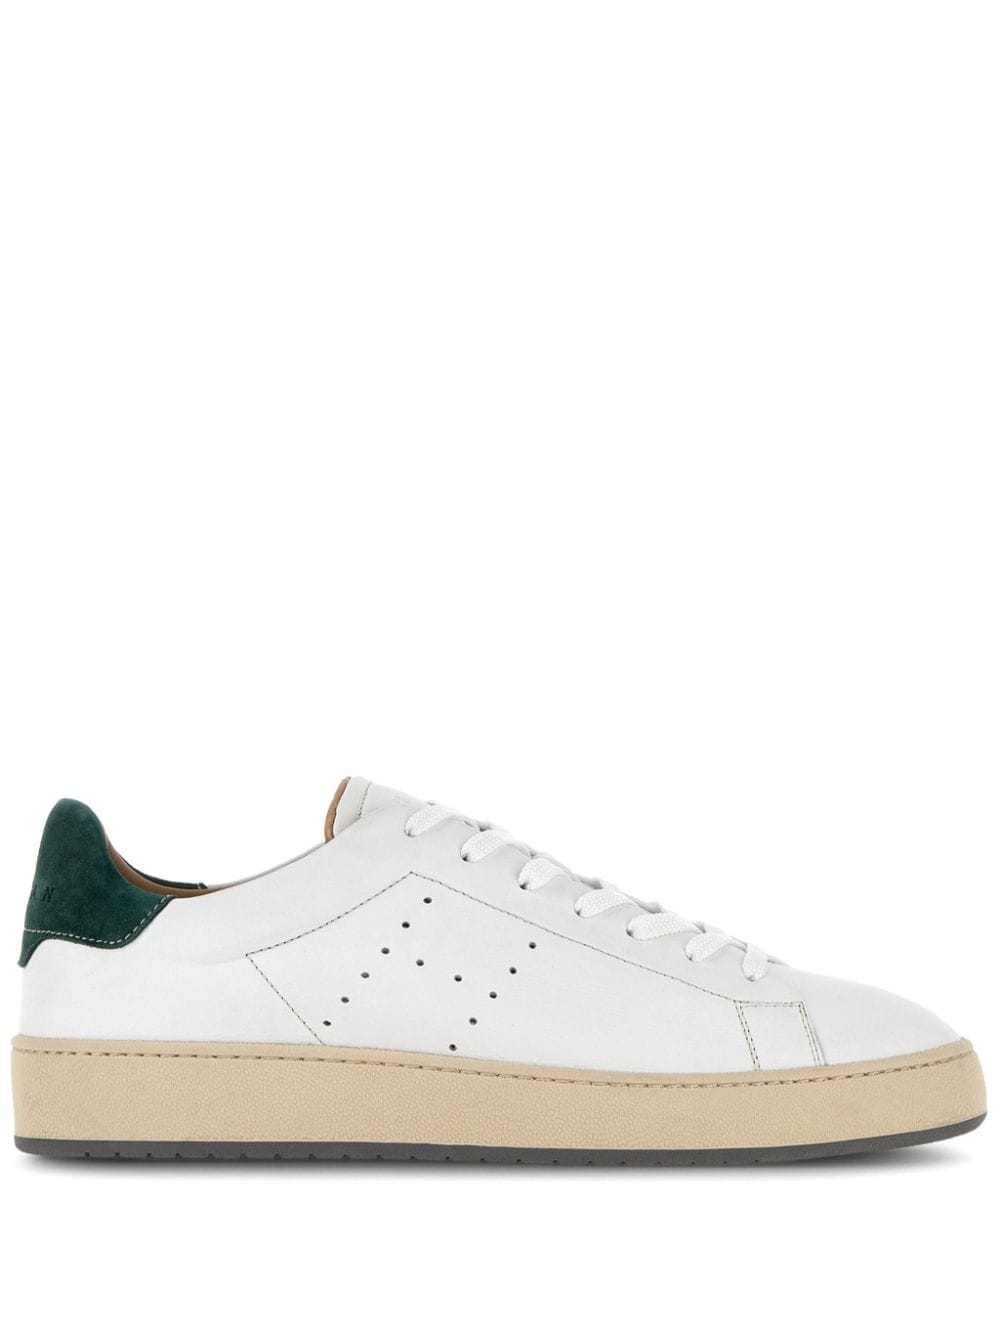 H672 leather low-top sneakers